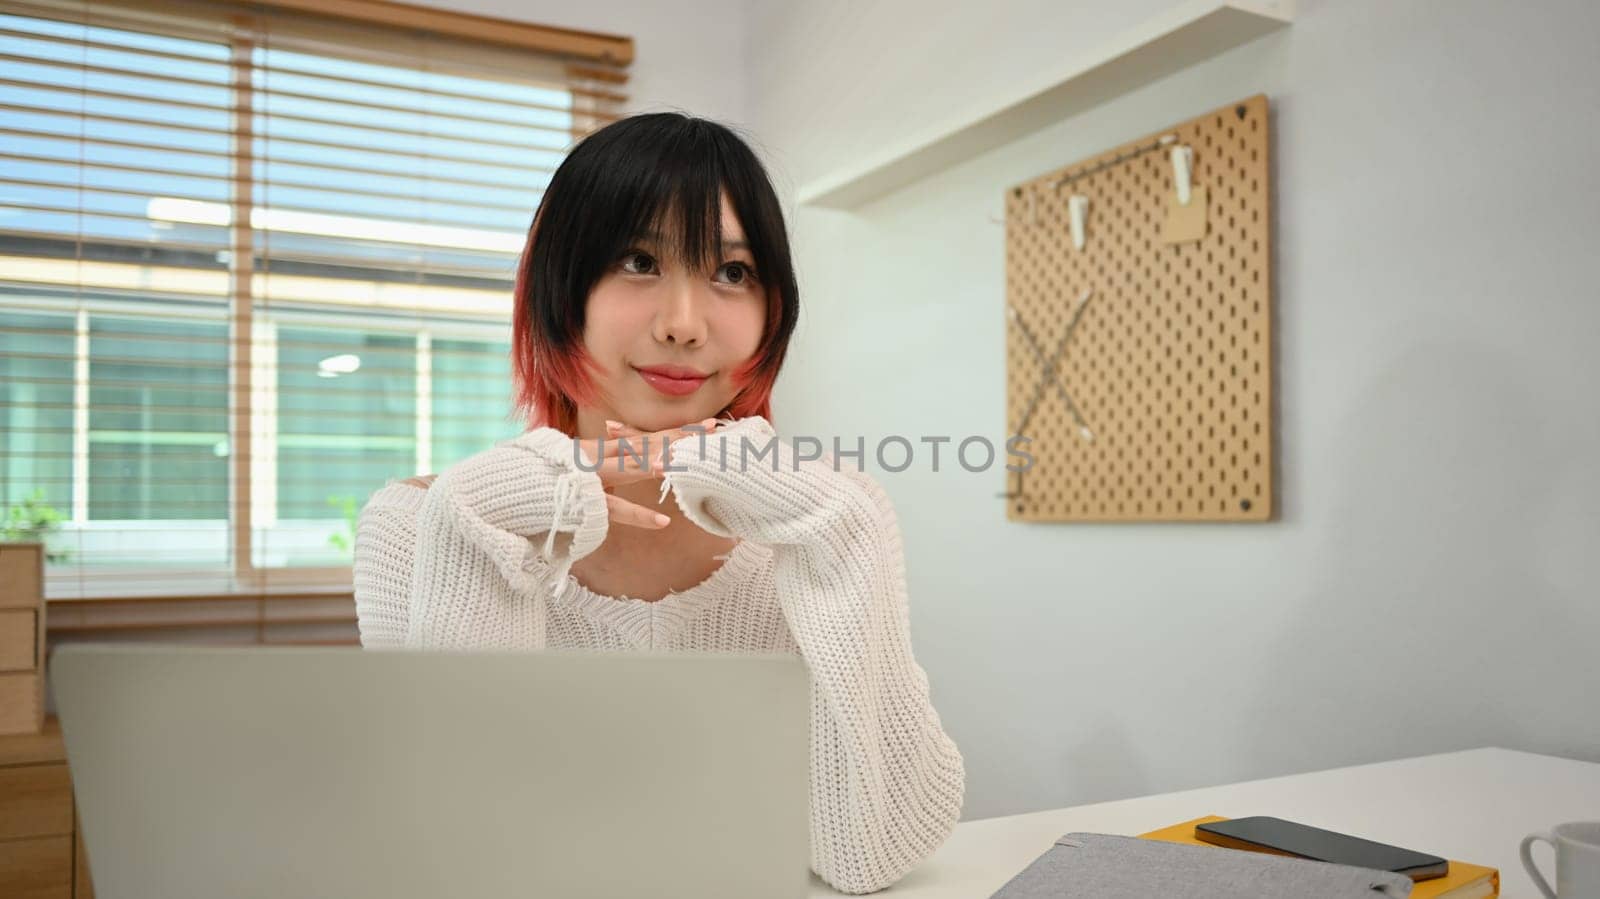 Attractive young woman using laptop computer at desk in home office. Freelancer, working remotely and technology by prathanchorruangsak